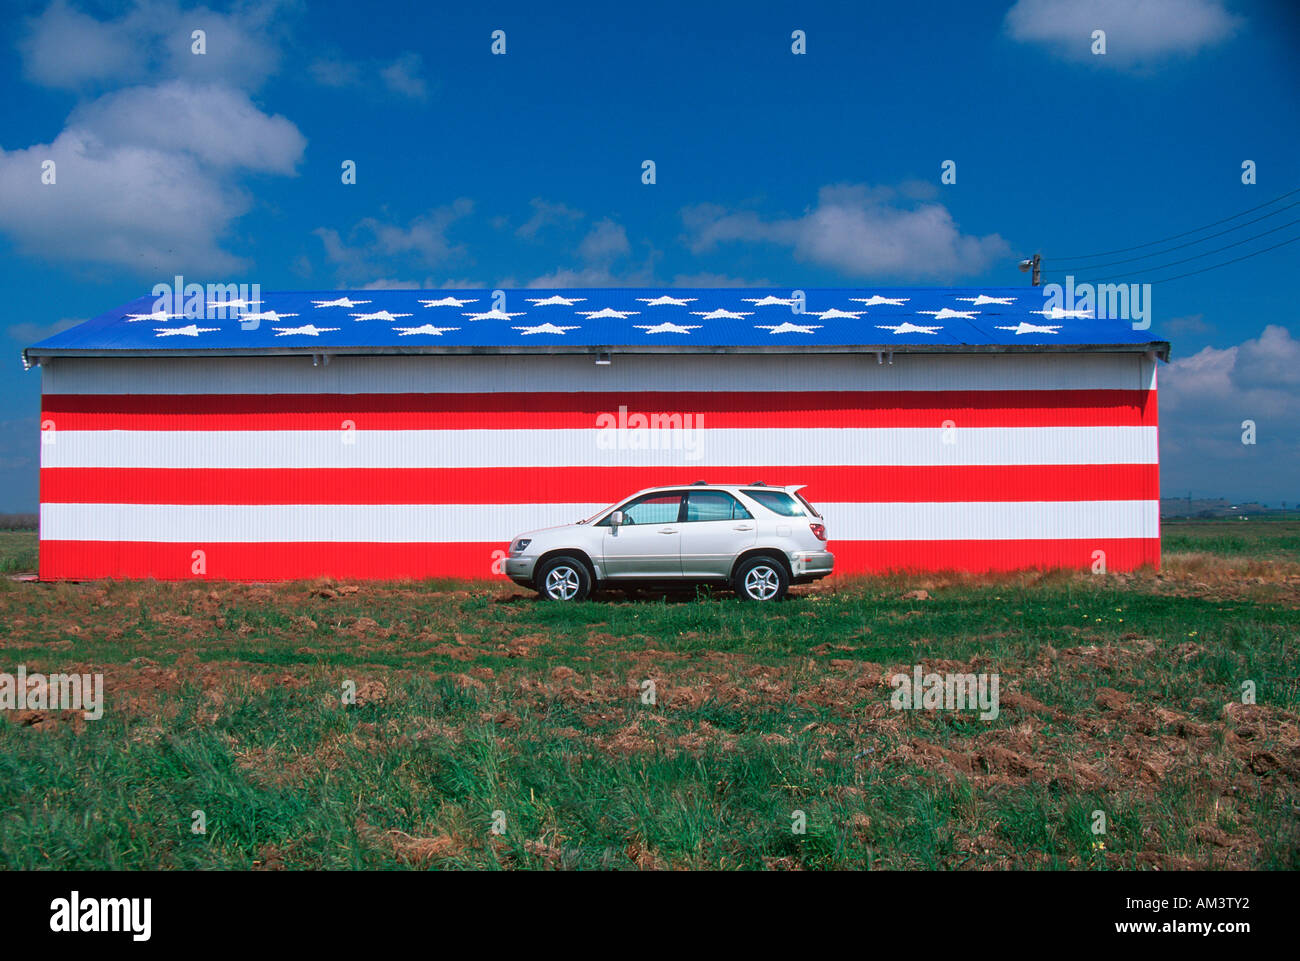 Joe Sohm s RX300 Lexus in front of a barn painted in red white and blue for the American Flag Stock Photo